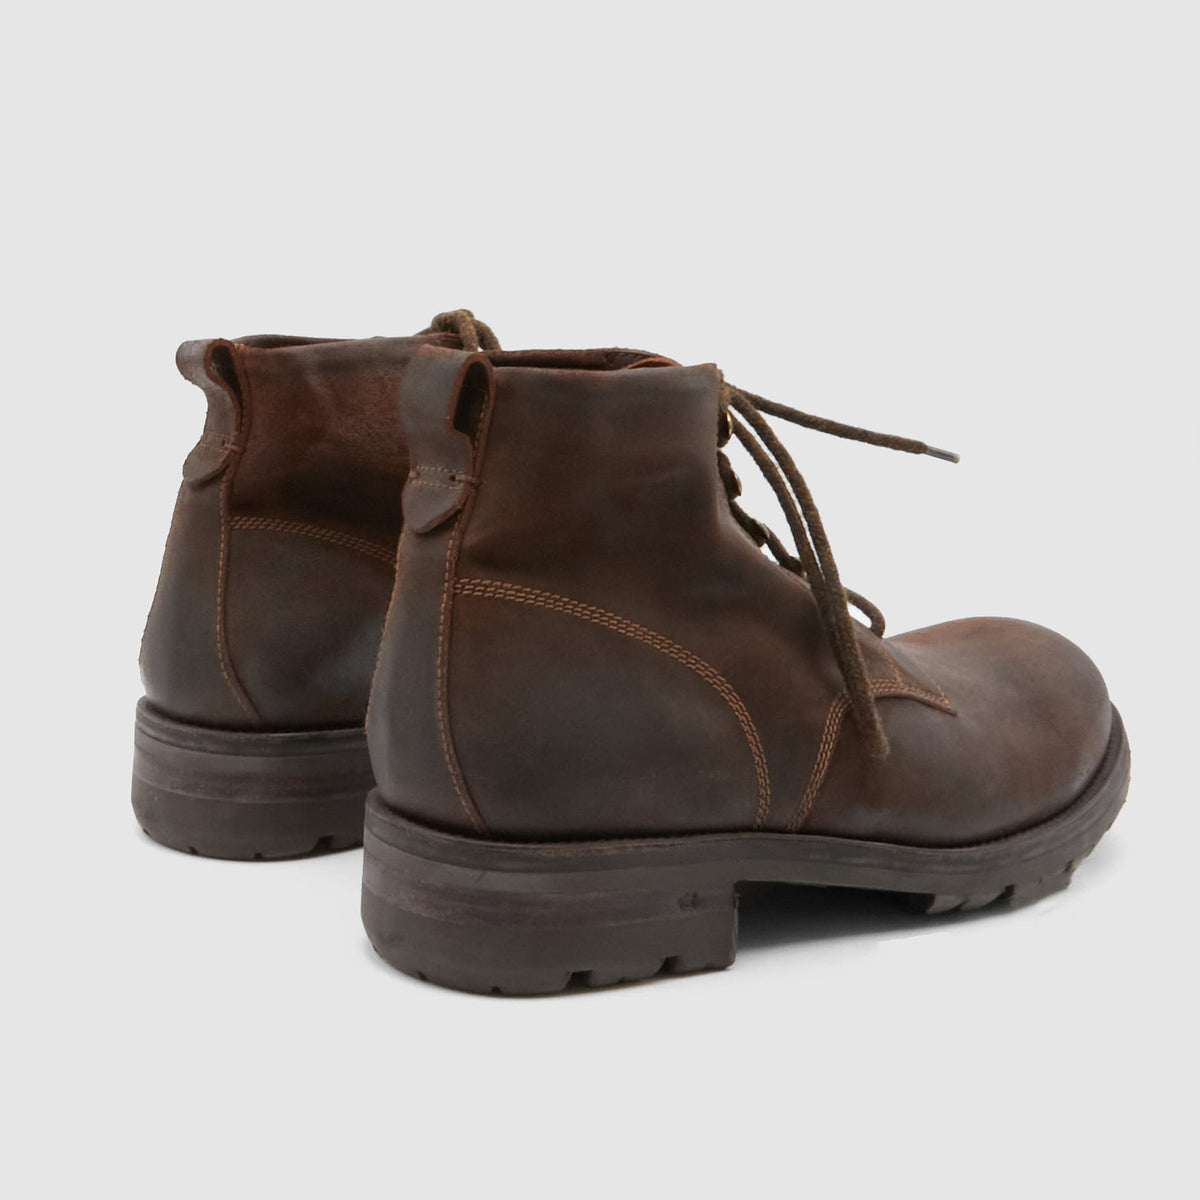 n.d.c. made by hand Vintage Inspired Work Boots